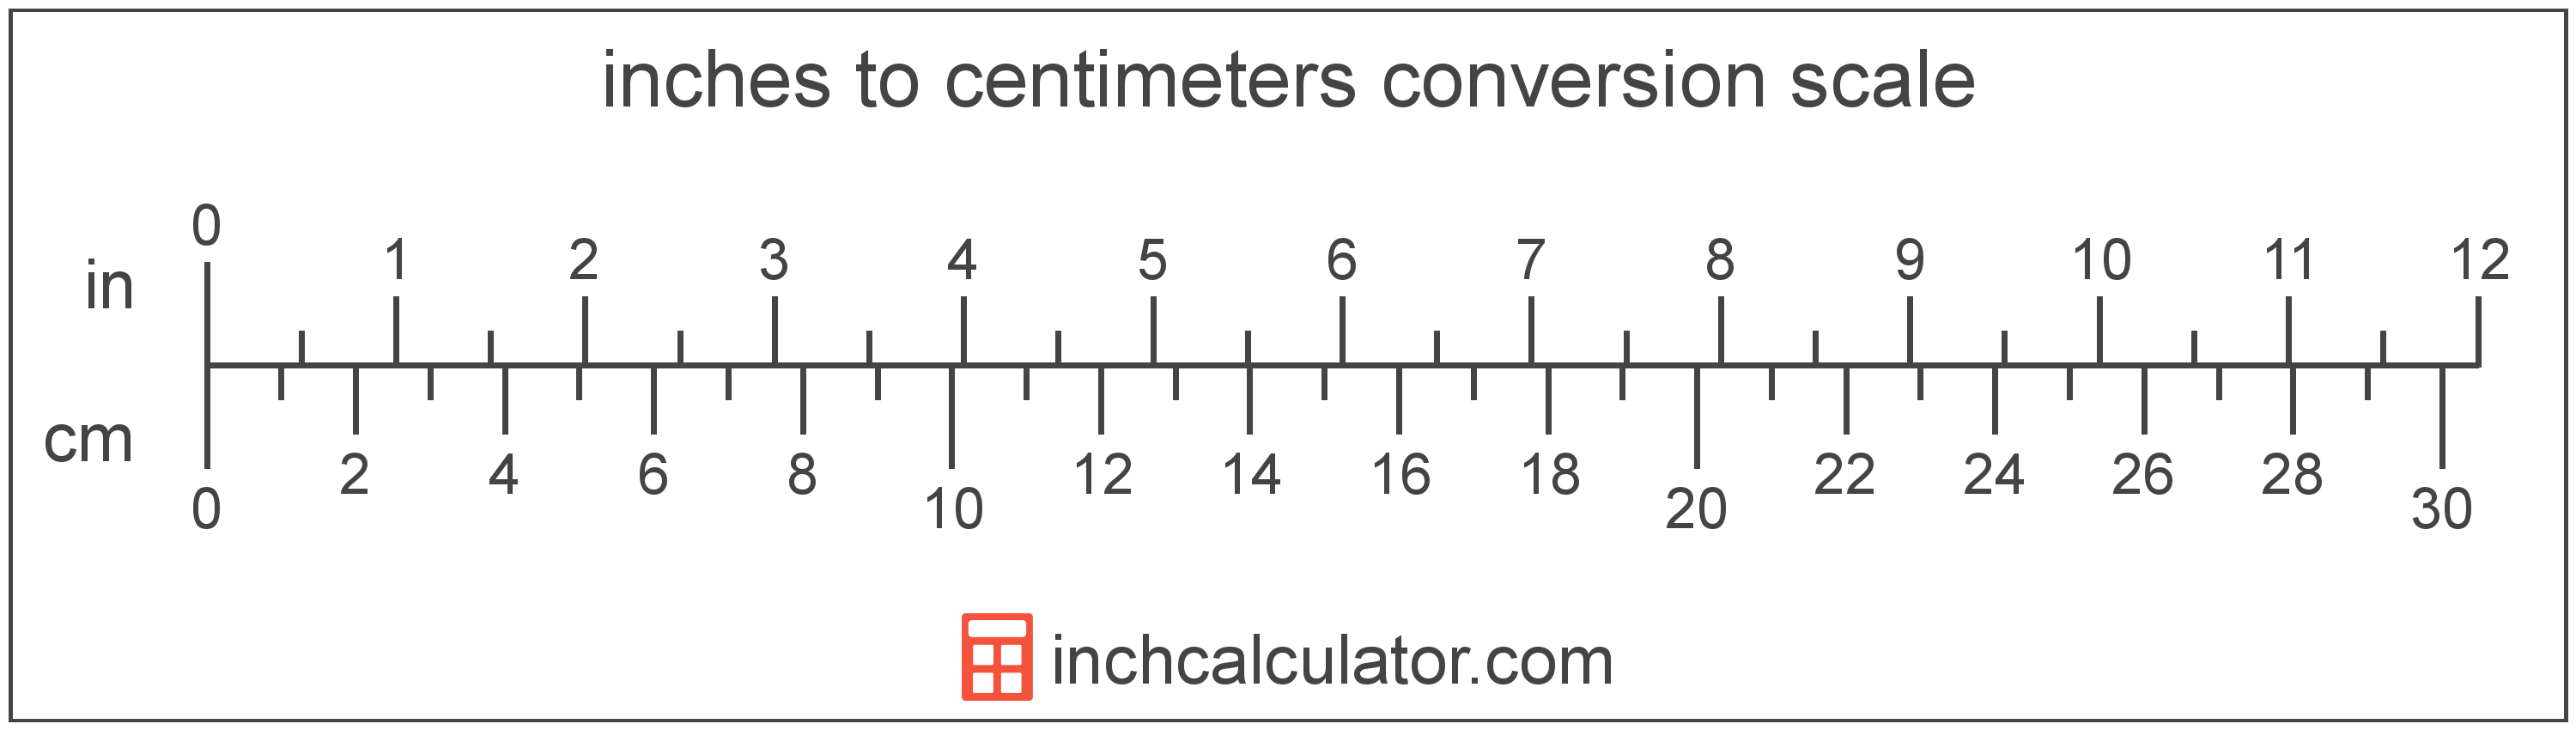 Measurement Chart Inches To Centimeters